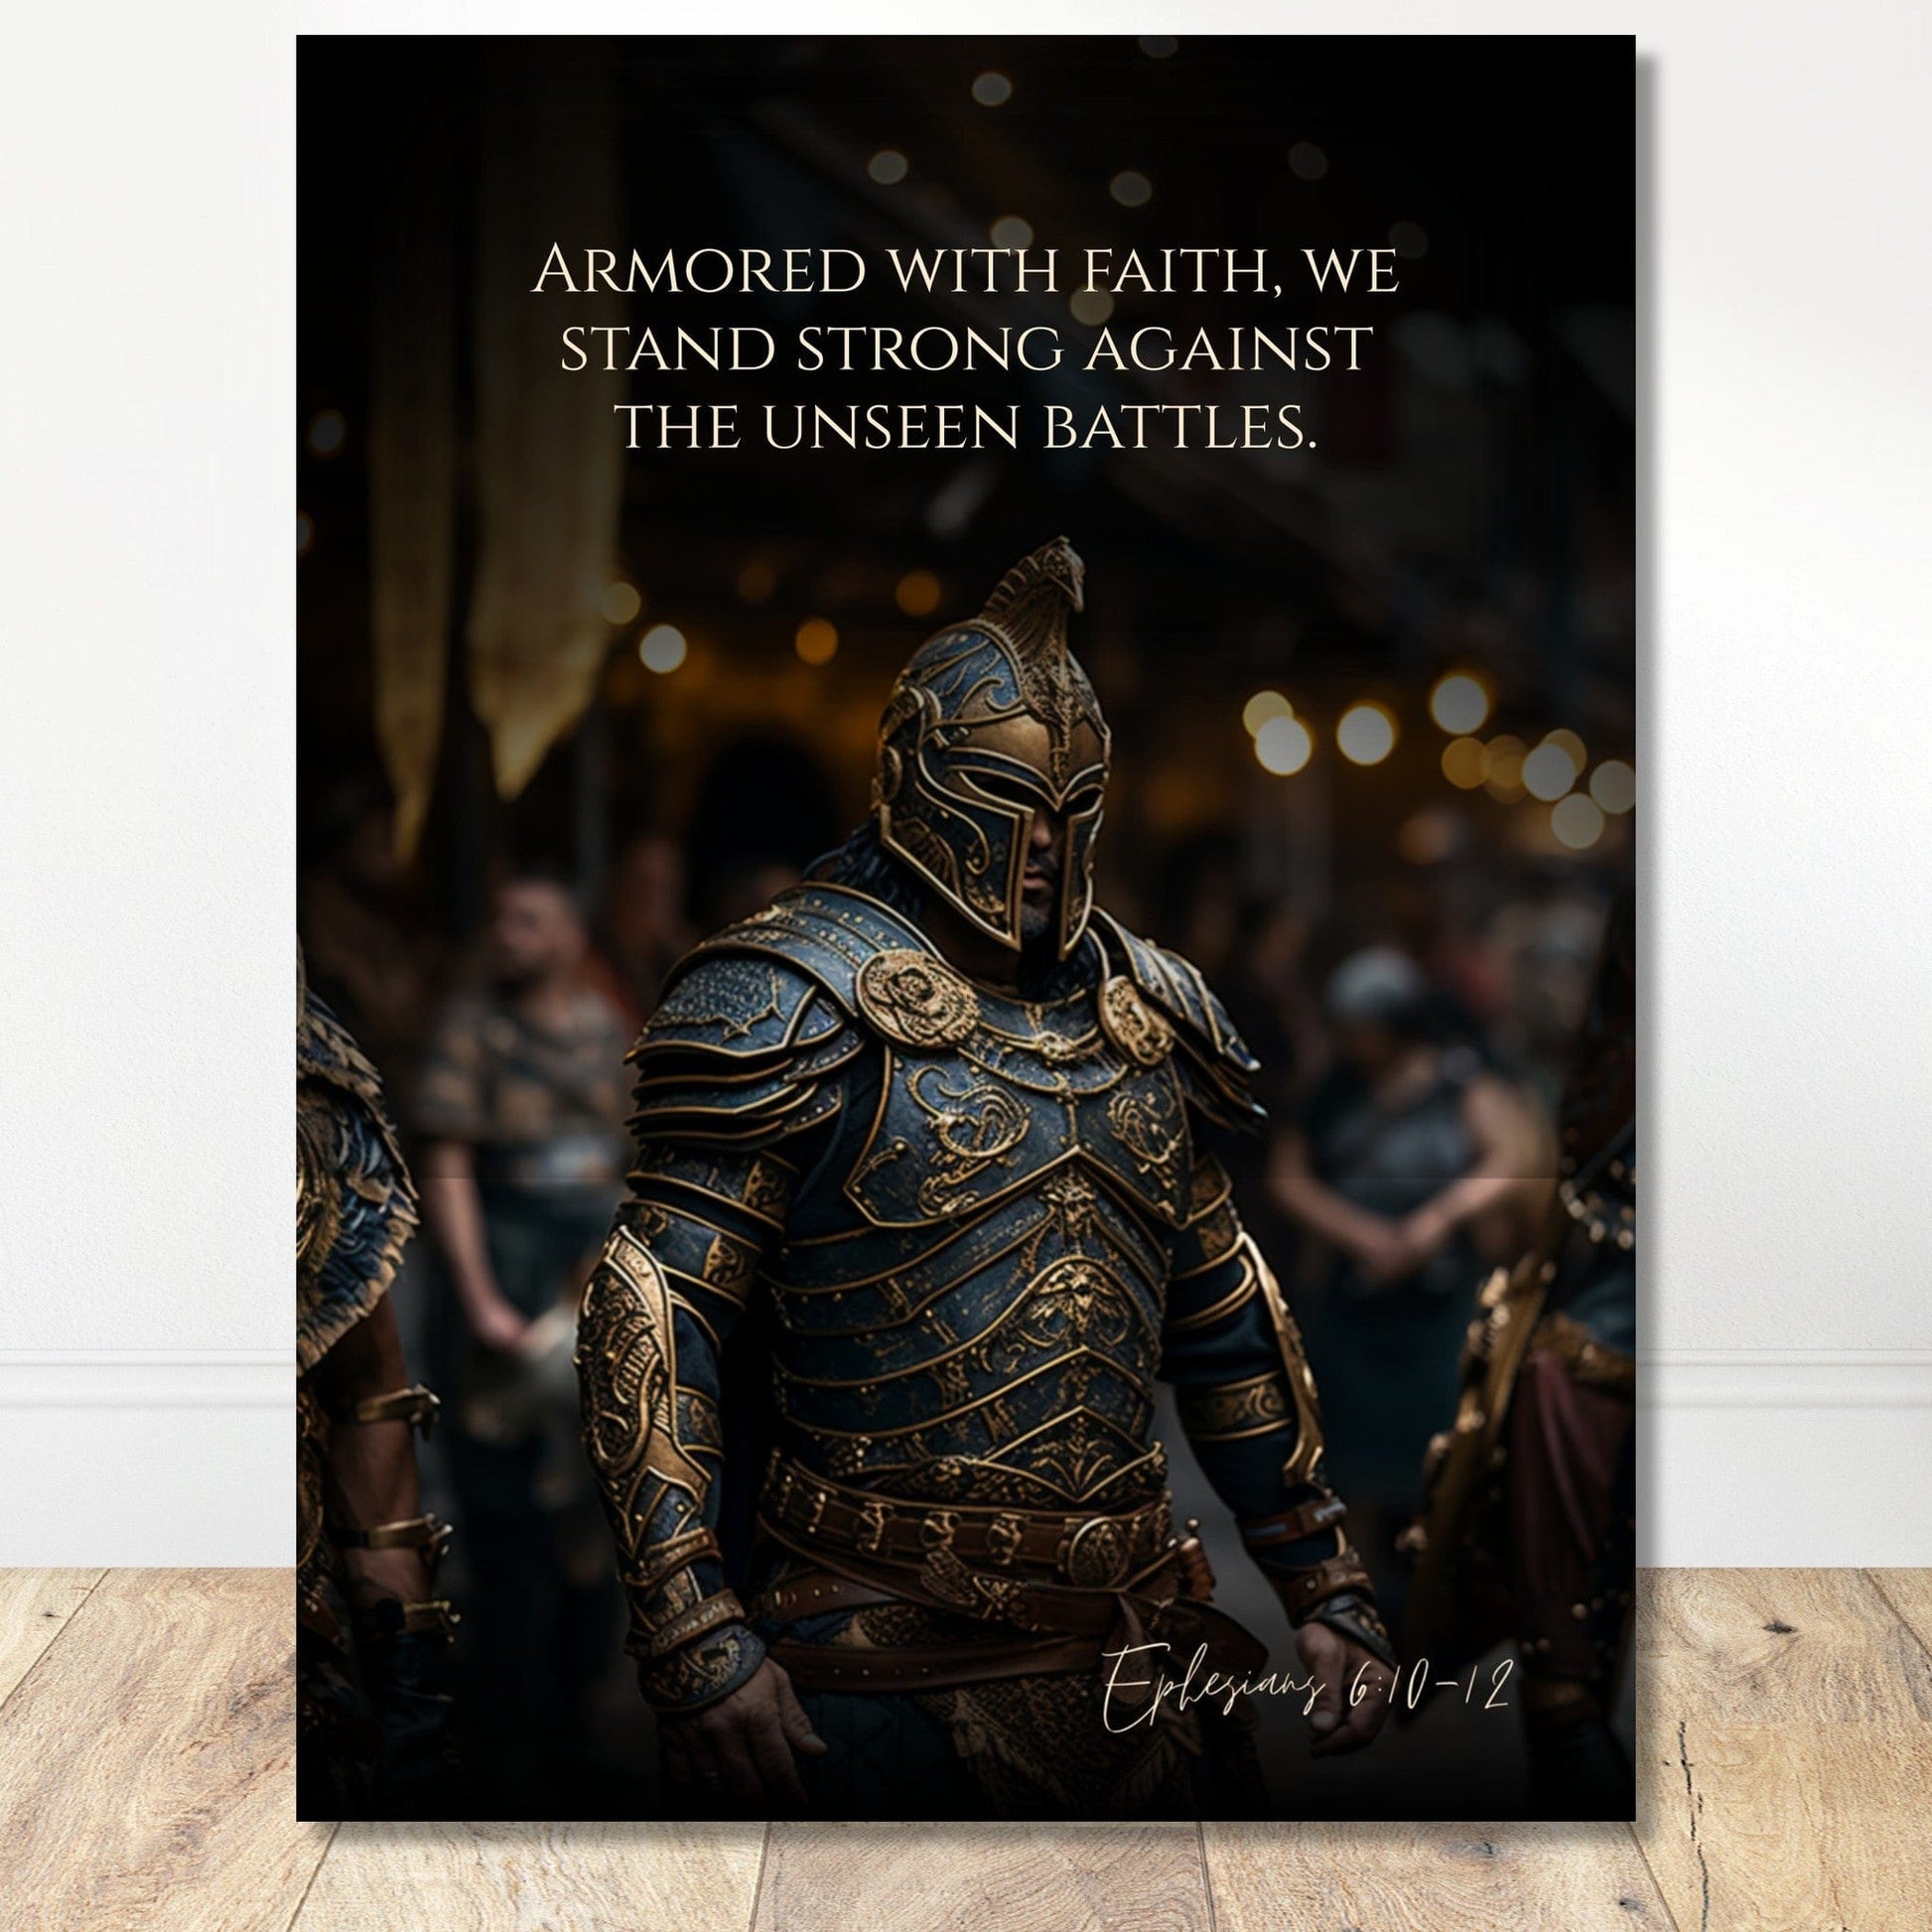 Coffee With My Father Print Material 45x60 cm / 18x24″ / Premium Matte Paper Poster / - The Unseen Battles: Ephesians 6:10-12 - Artwork